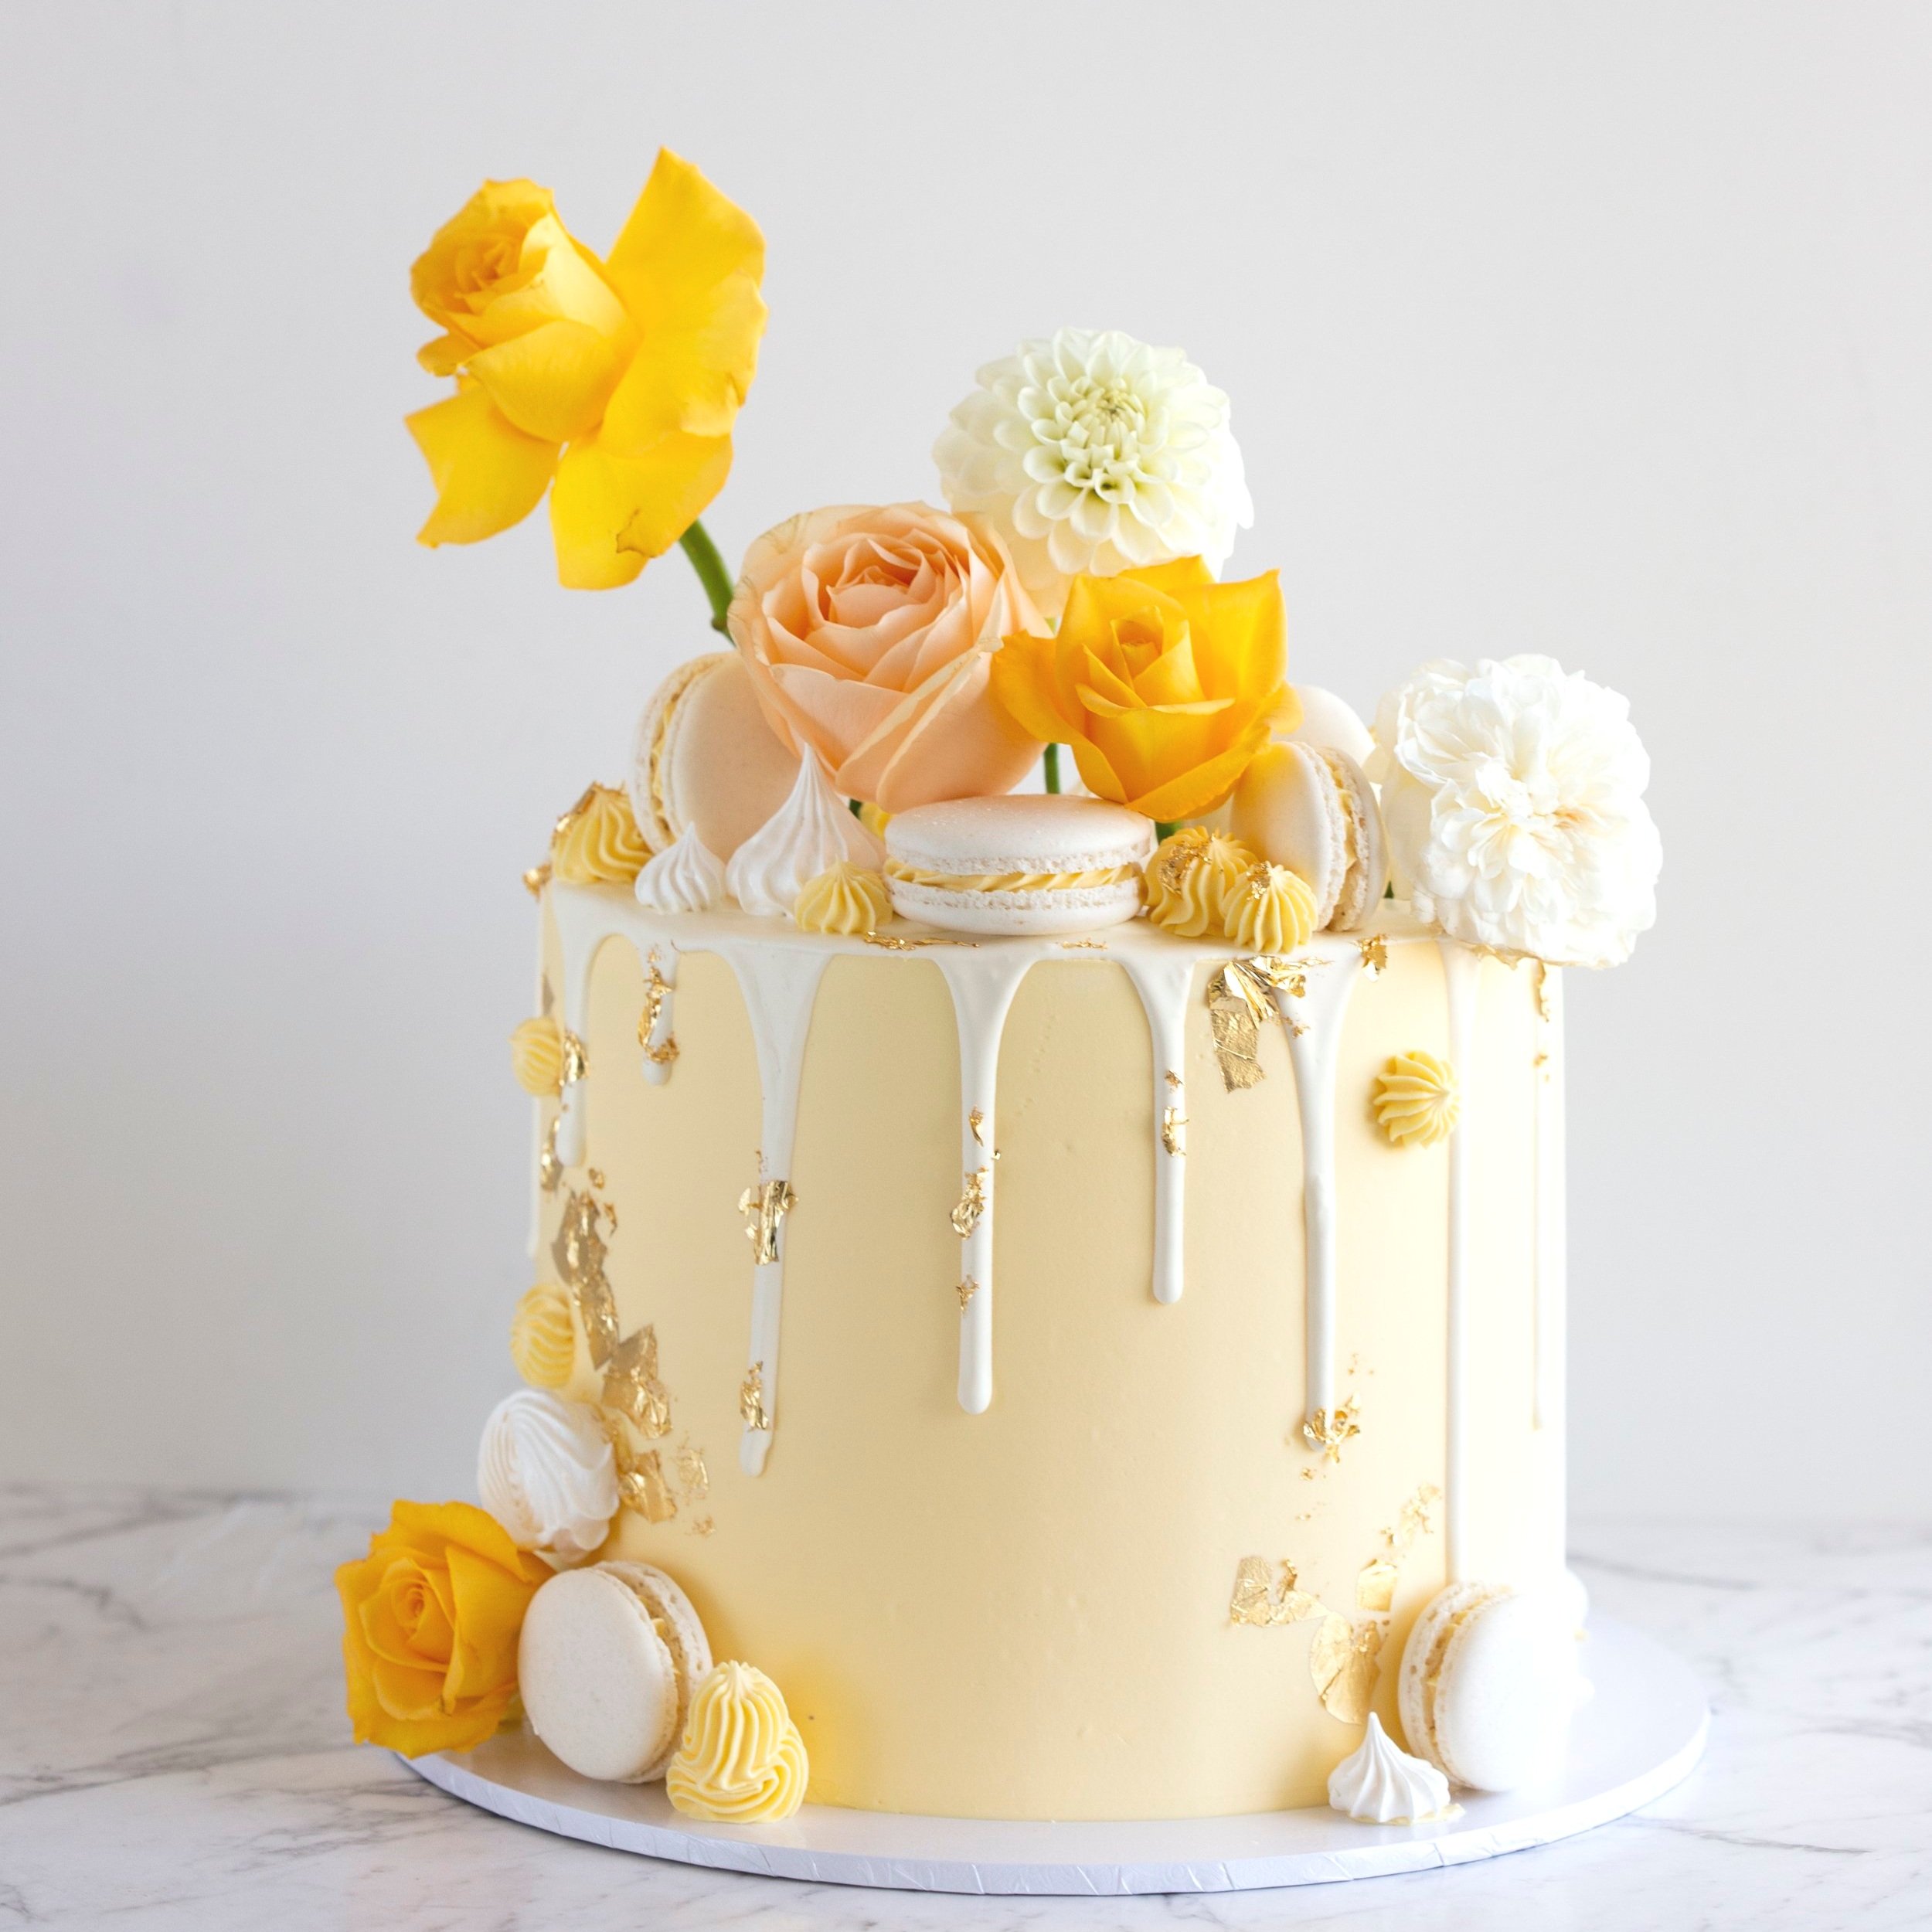 Wellington cake shop- Order online for the best cakes in Wellington